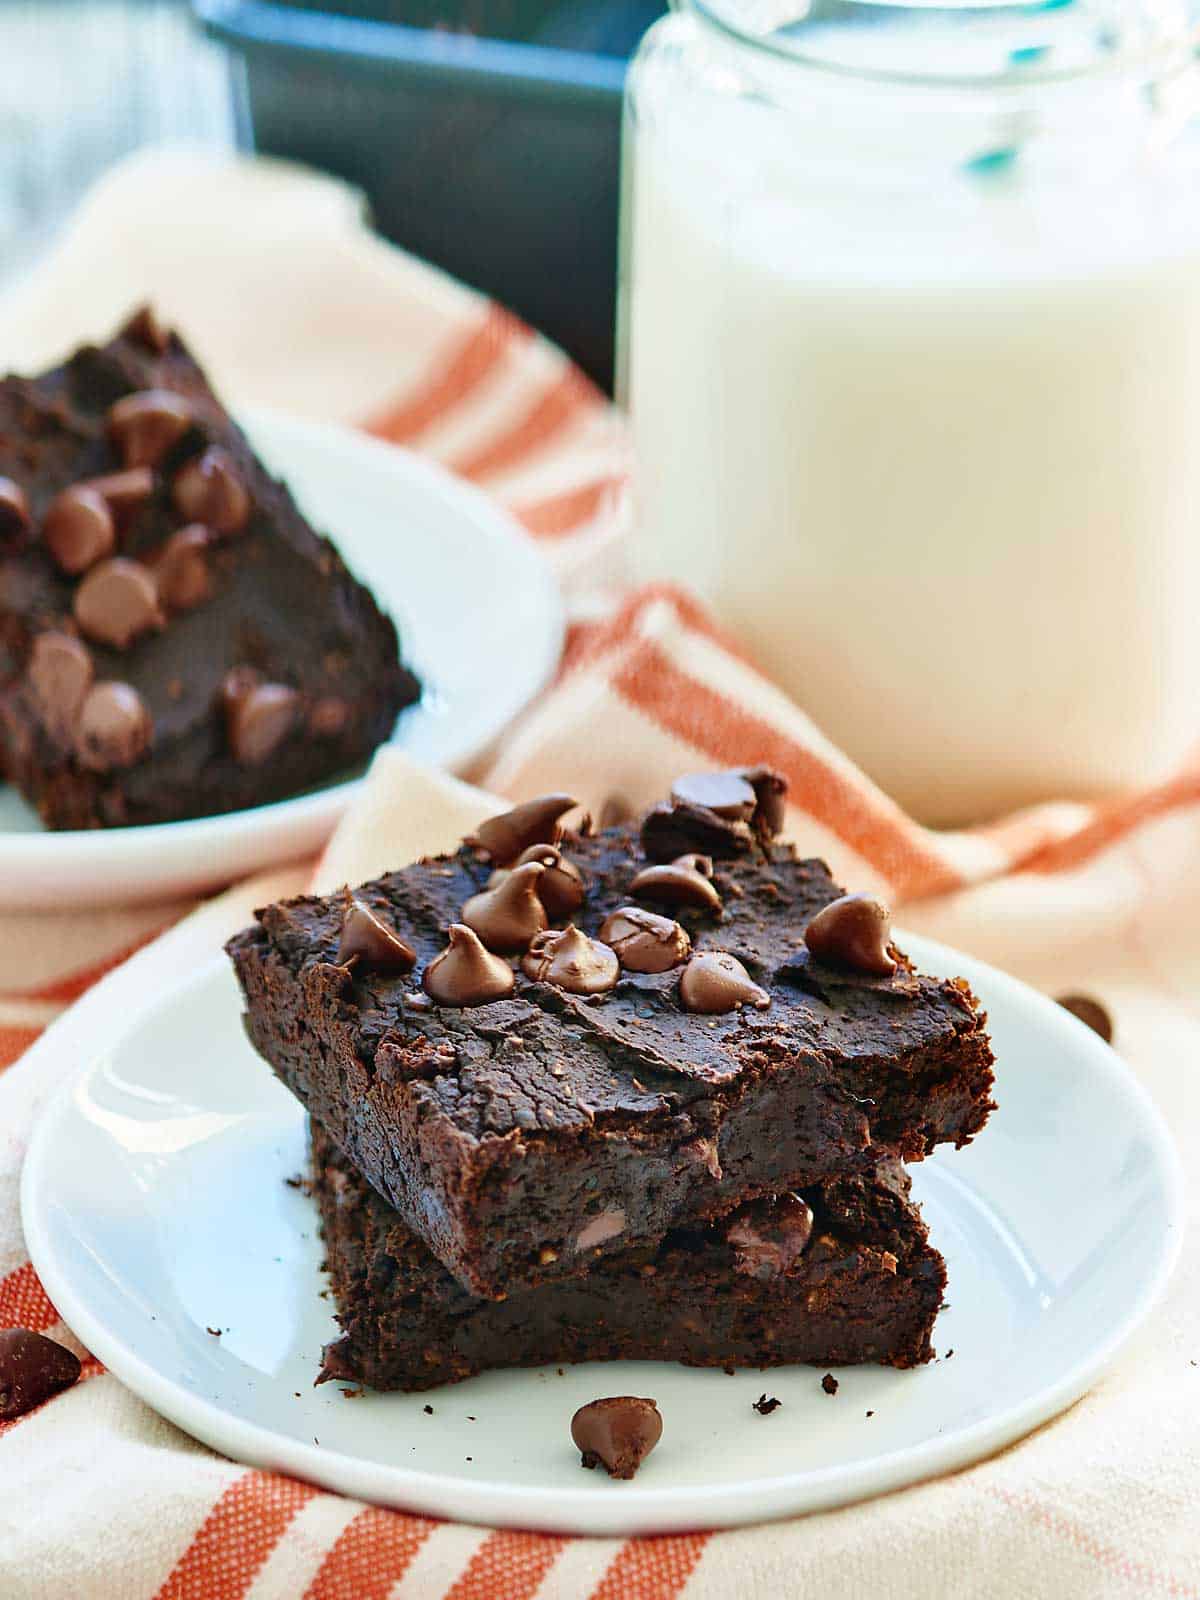 Black Bean Brownies - No Flour and Naturally Sweetened!